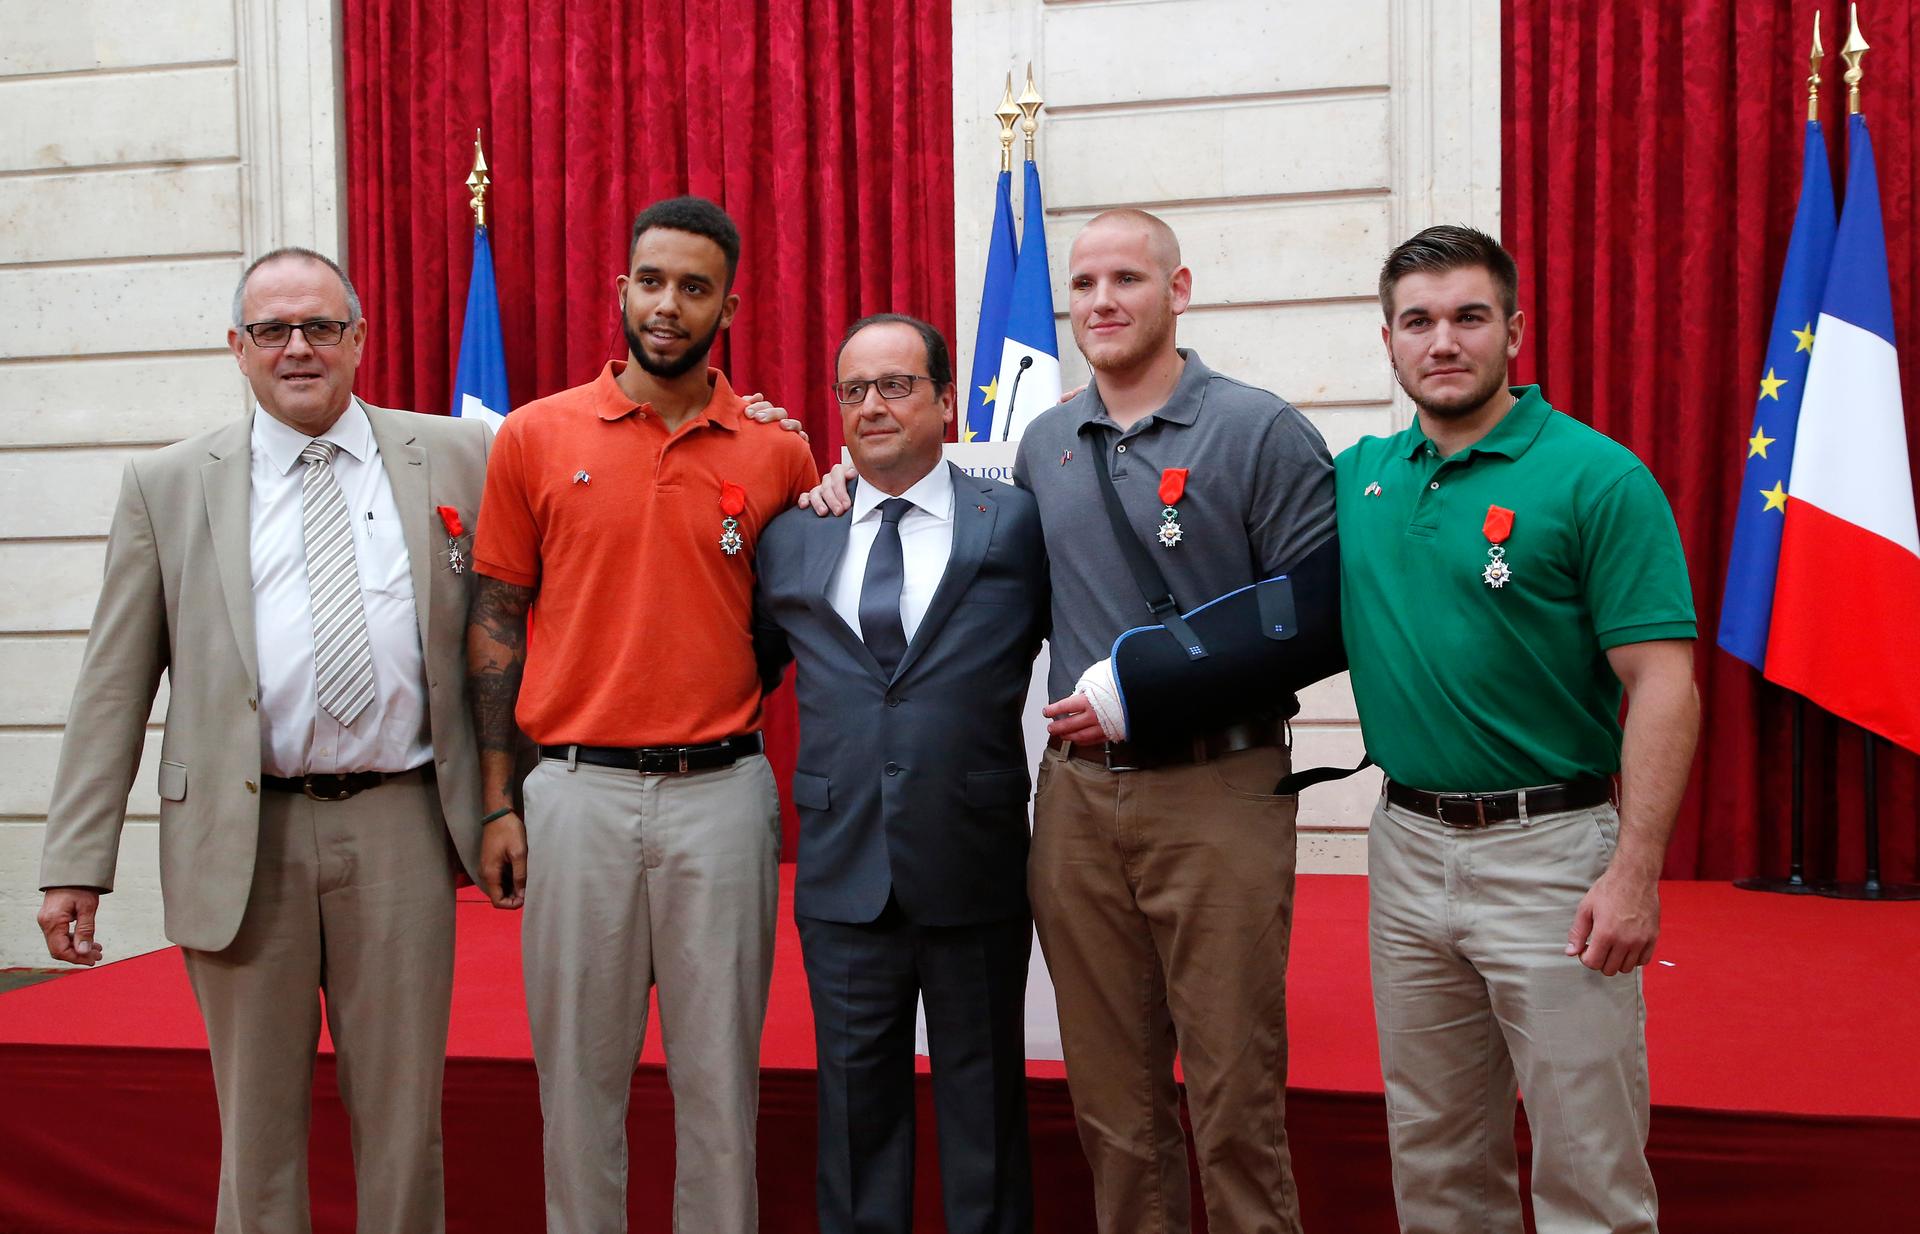 French President Francois Hollande (C) poses with British businessman Chris Norman (L), U.S. student Anthony Sadler (2ndL), U.S. Airman First Class Spencer Stone (2ndR) and U.S. National Guardsman Alek Skarlatos (R) during a ceremony at the Elysee Palace